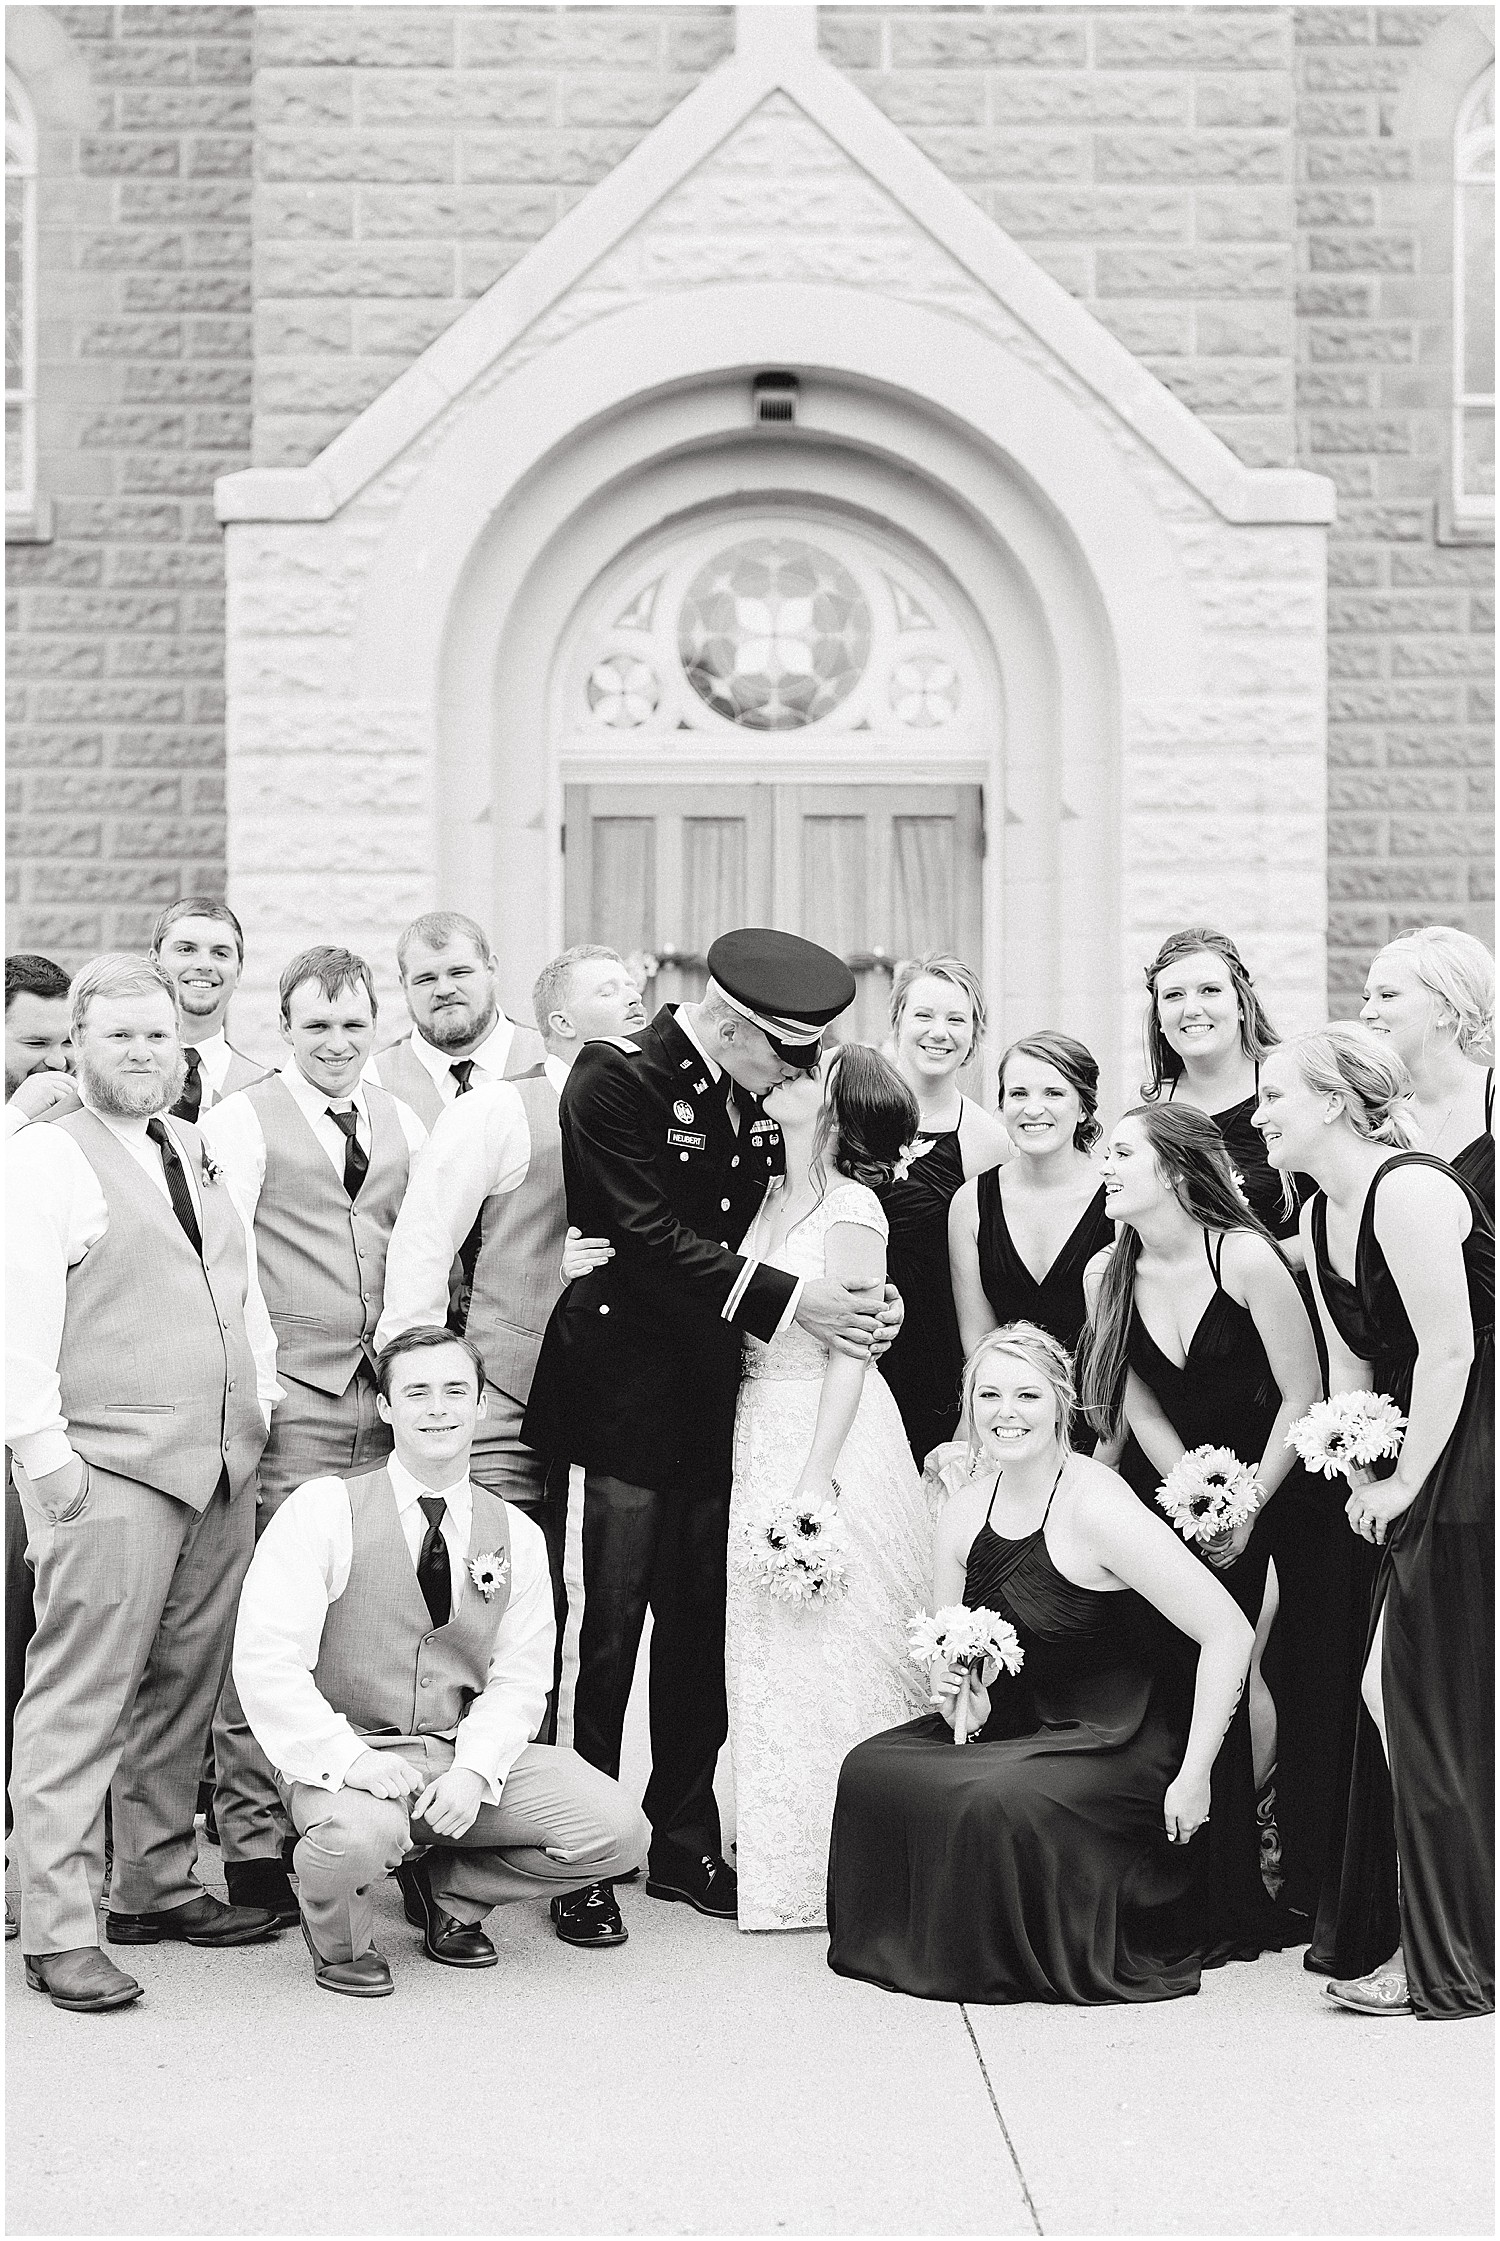 black and white image of bride and groom kissing surrounded by wedding party in front of church